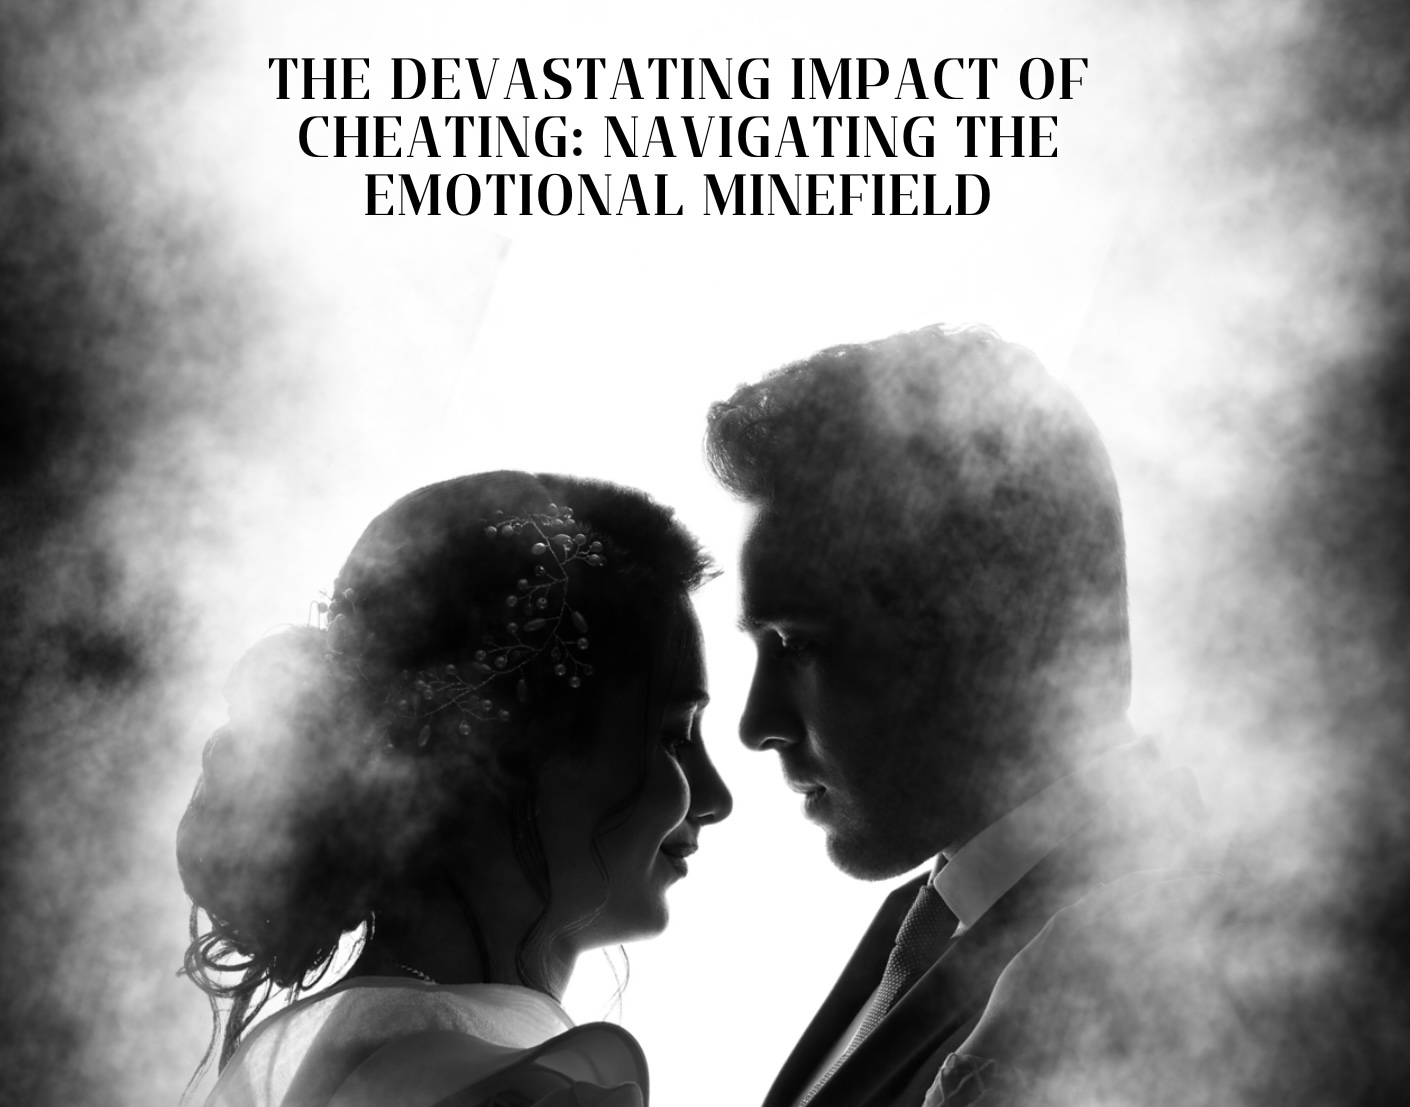 The Devastating Impact of Cheating: Navigating the Emotional Minefield